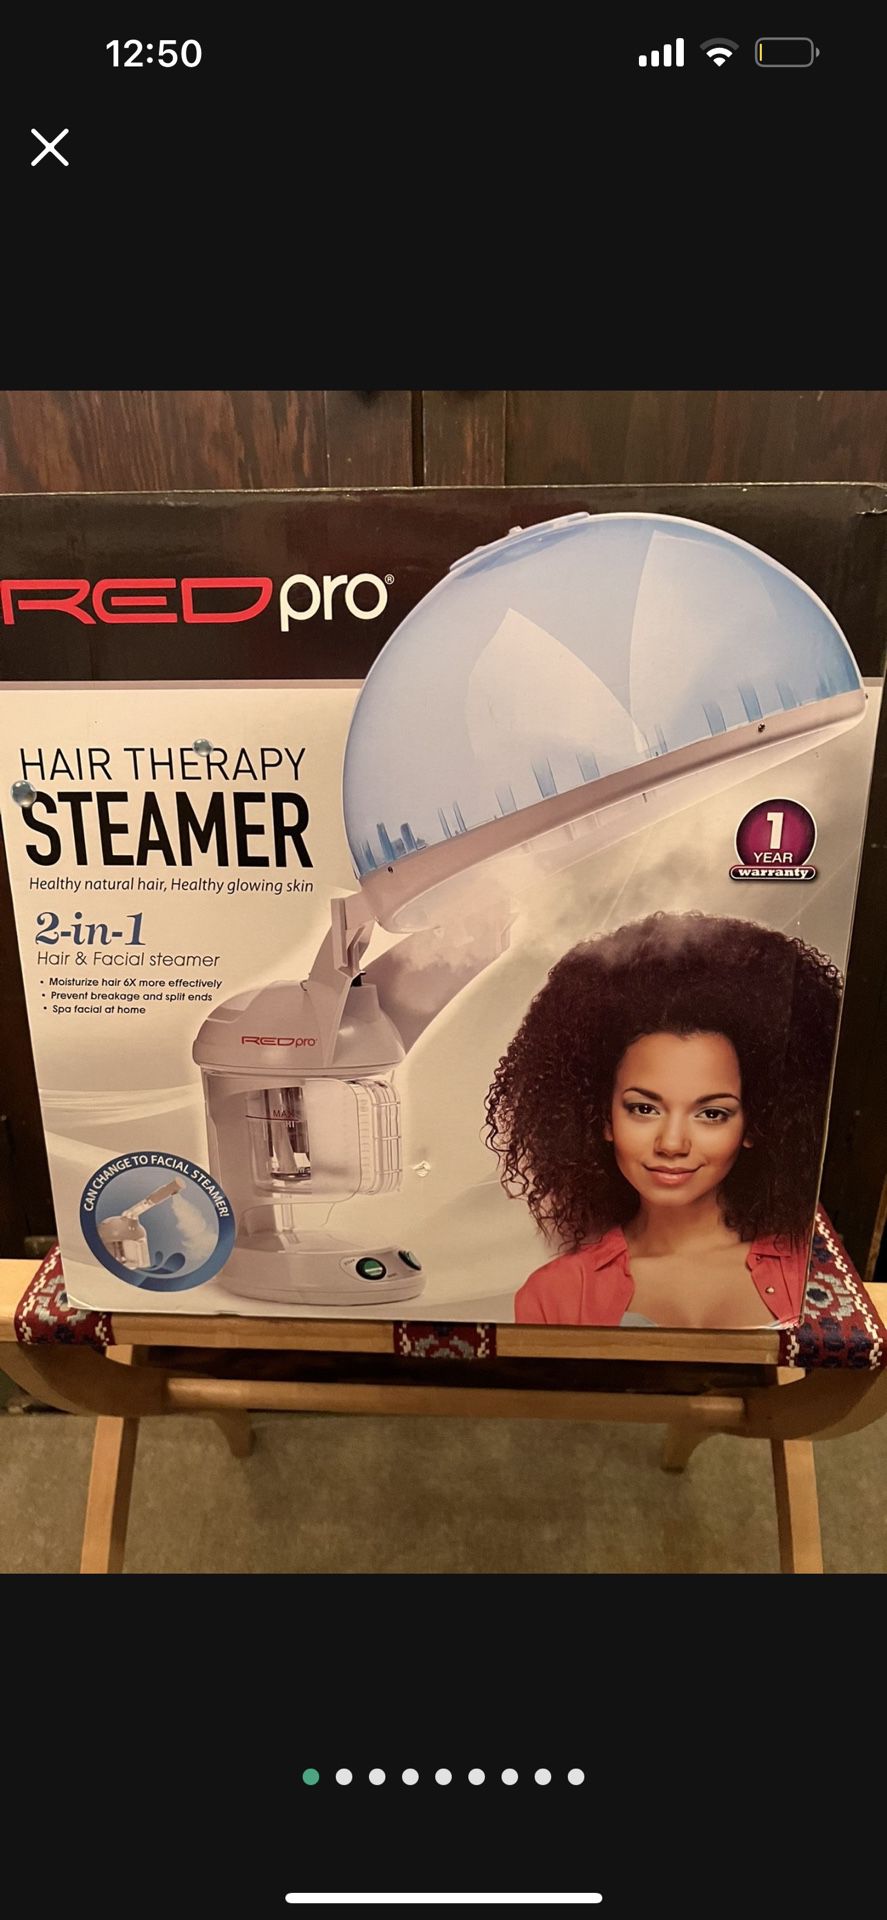 HAIR THERAPY STEAMER